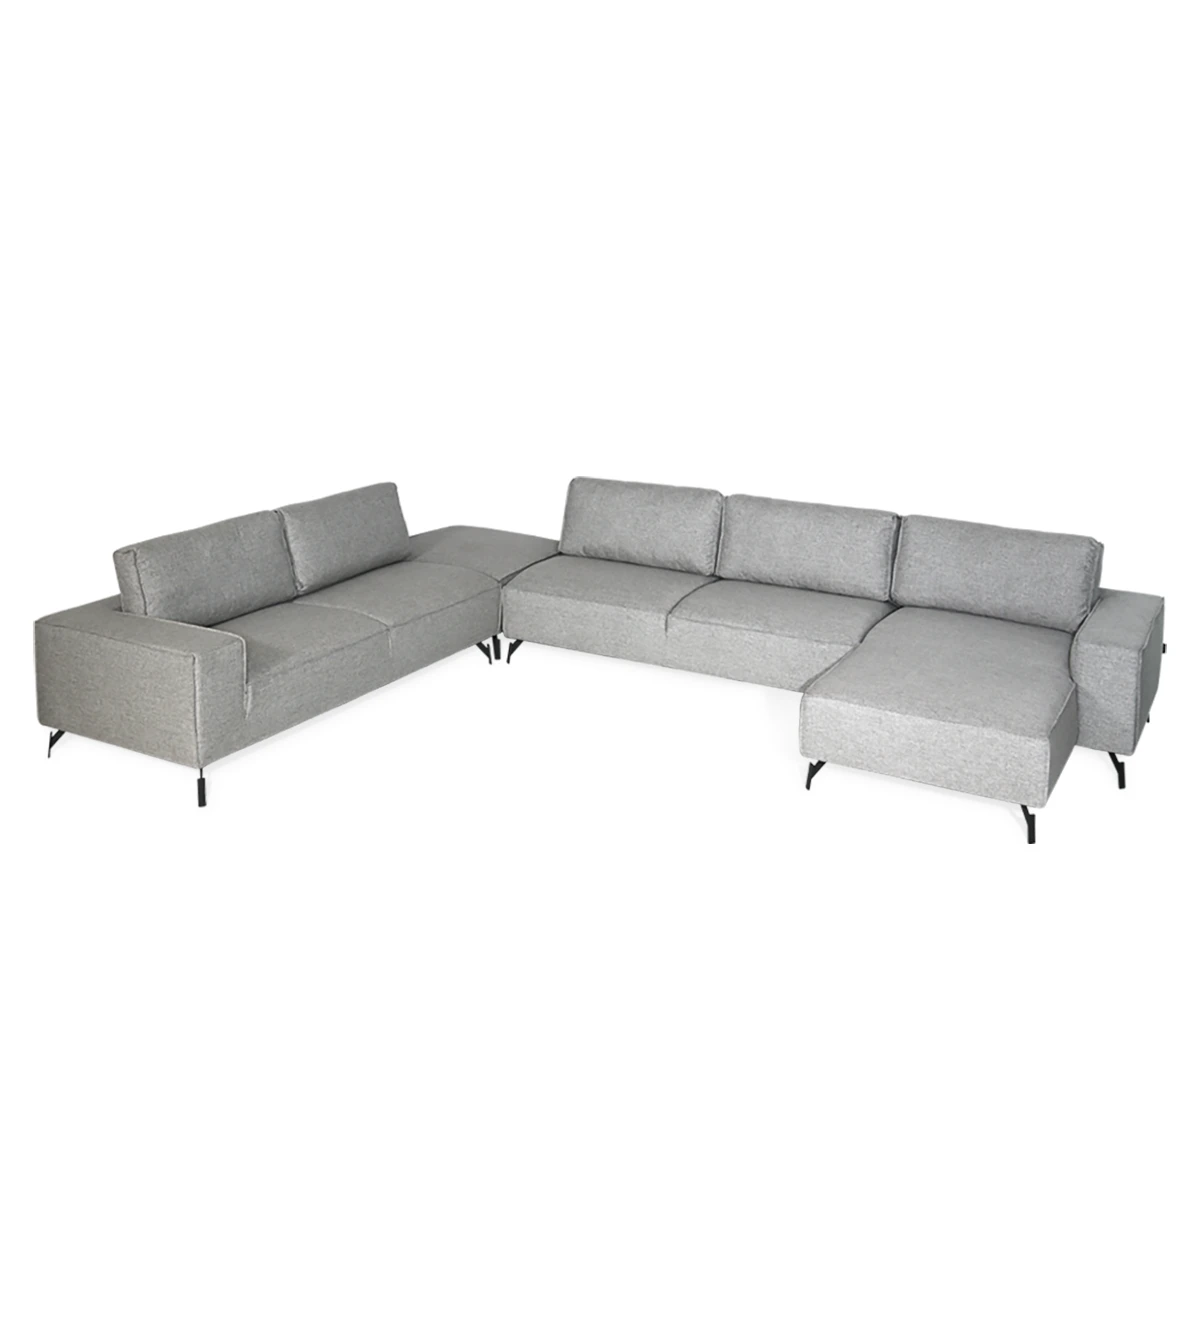 Tokyo corner sofa with chaise longue and pouf, upholstered in gray fabric, black lacquered metal legs, 410 x 313 cm.